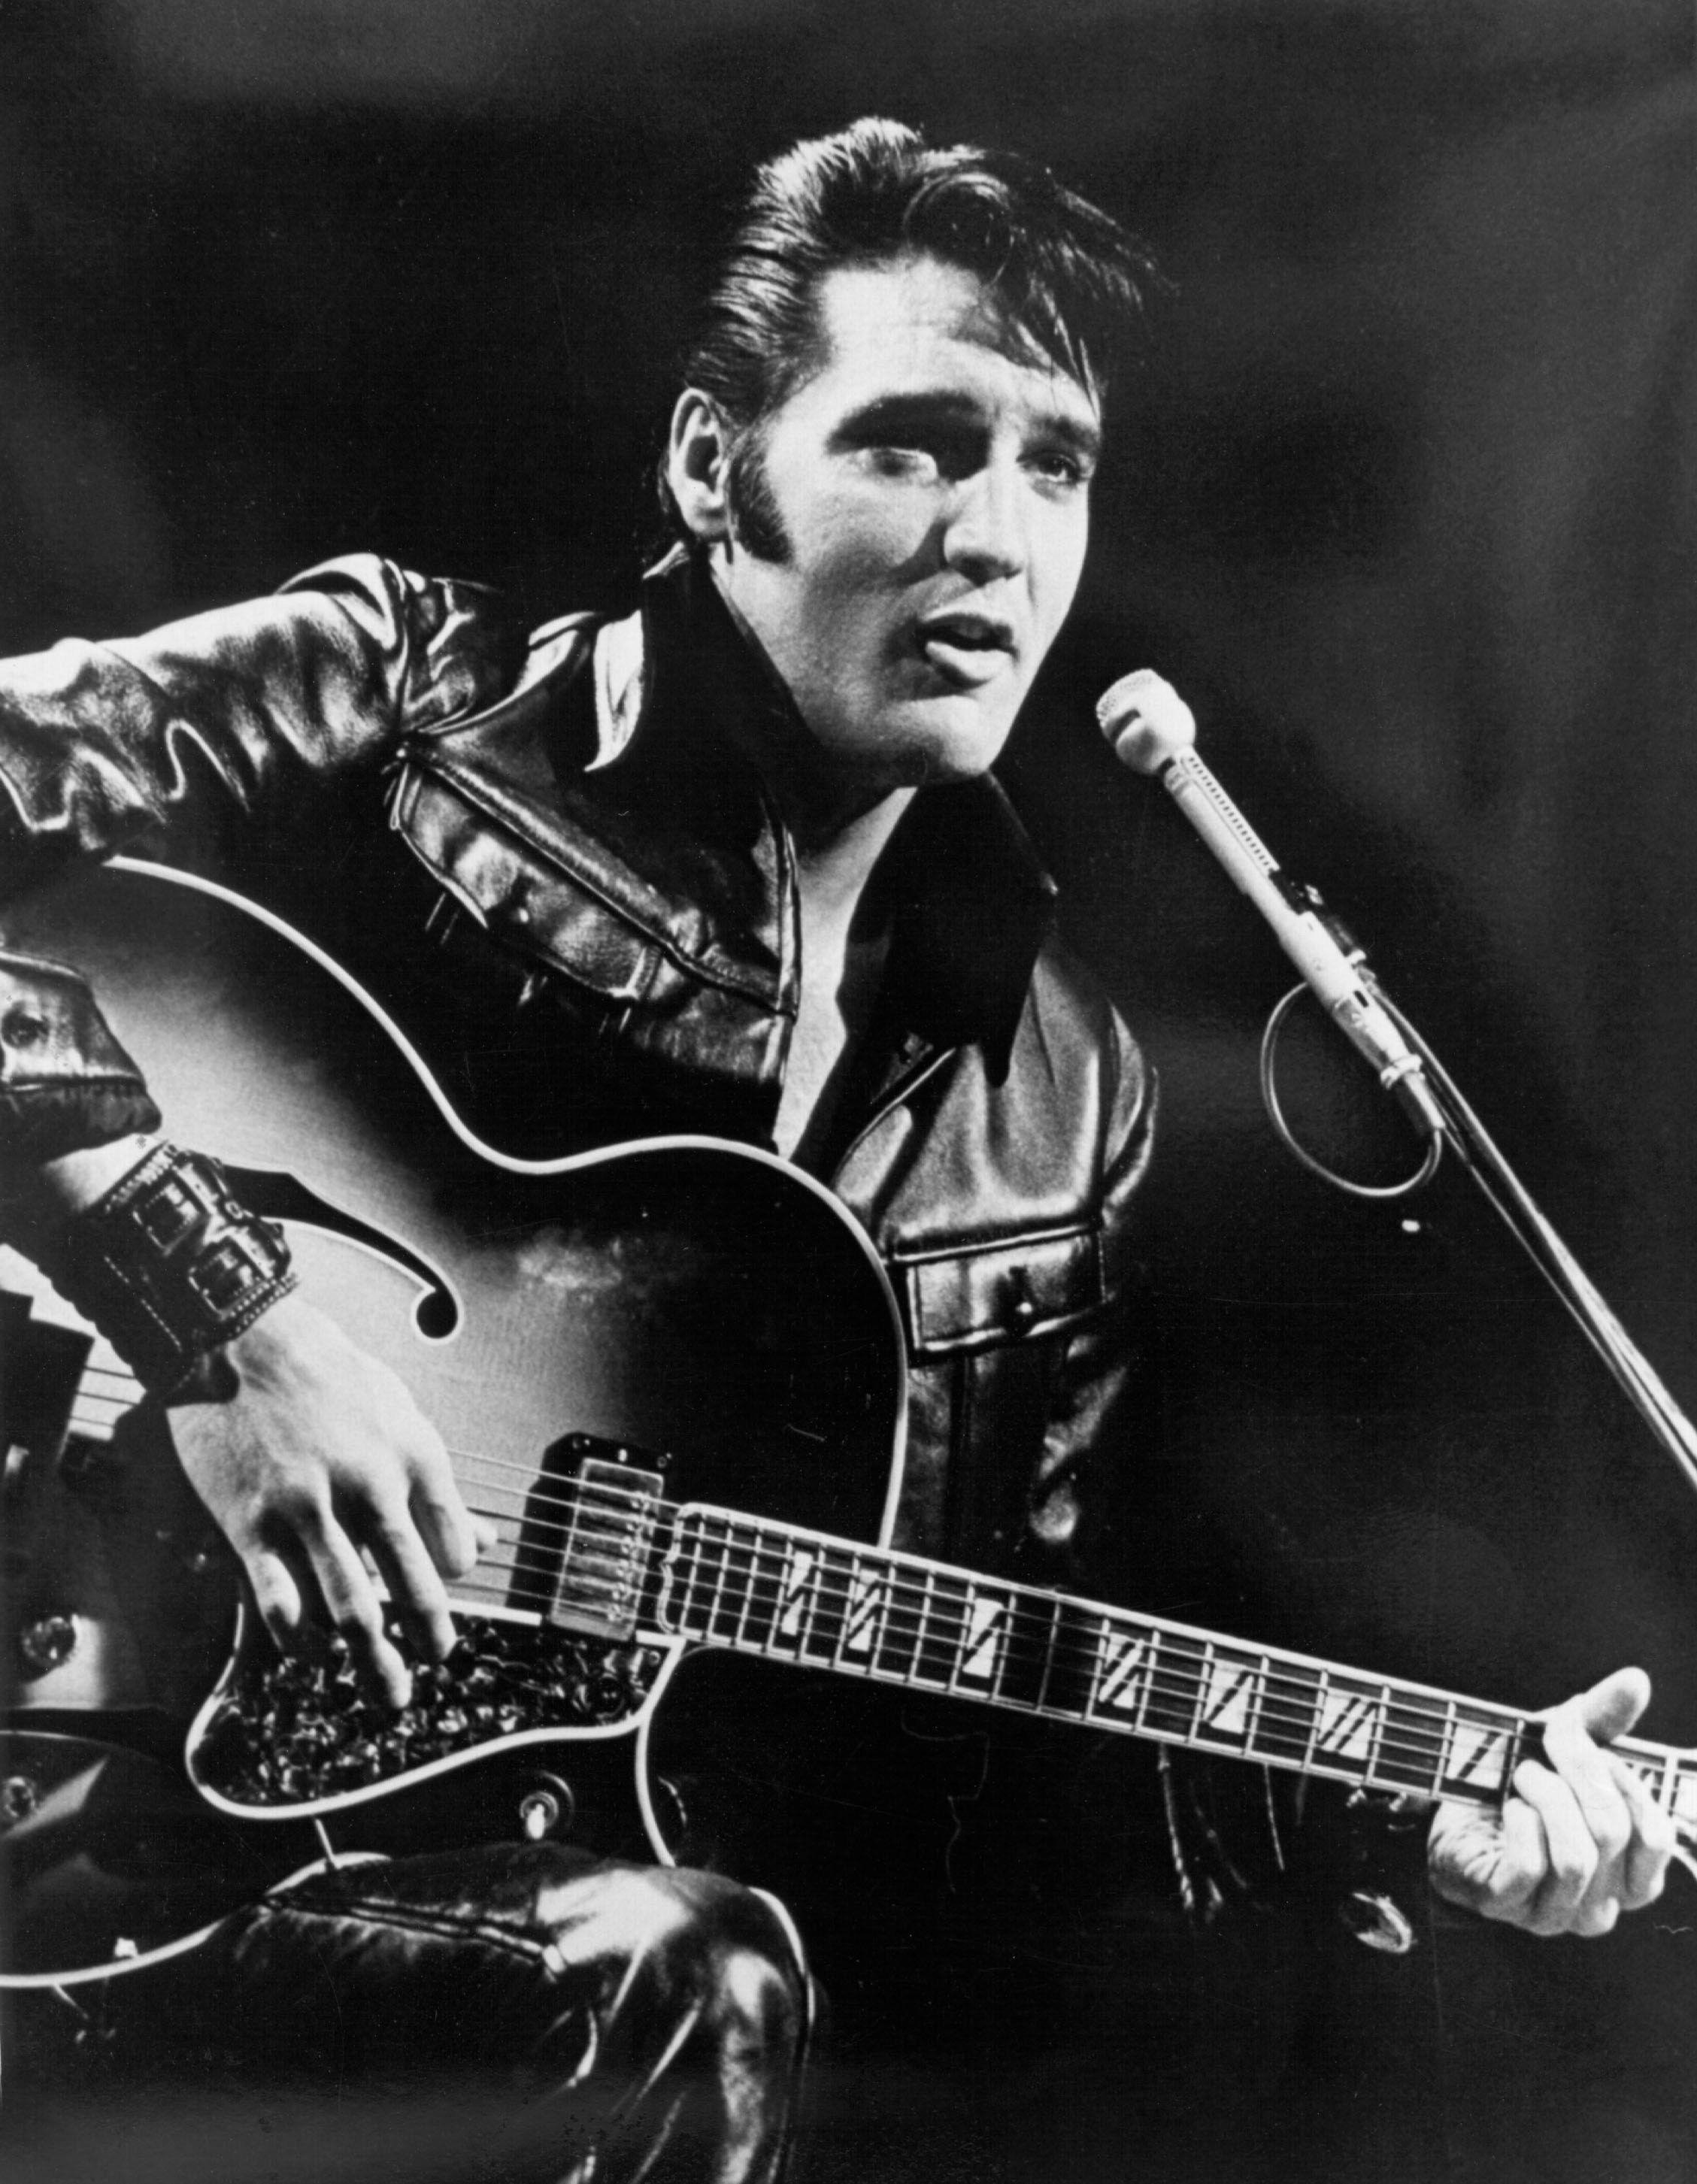 10 Latest Free Elvis Presley Wallpapers FULL HD 1920×1080 For PC Background